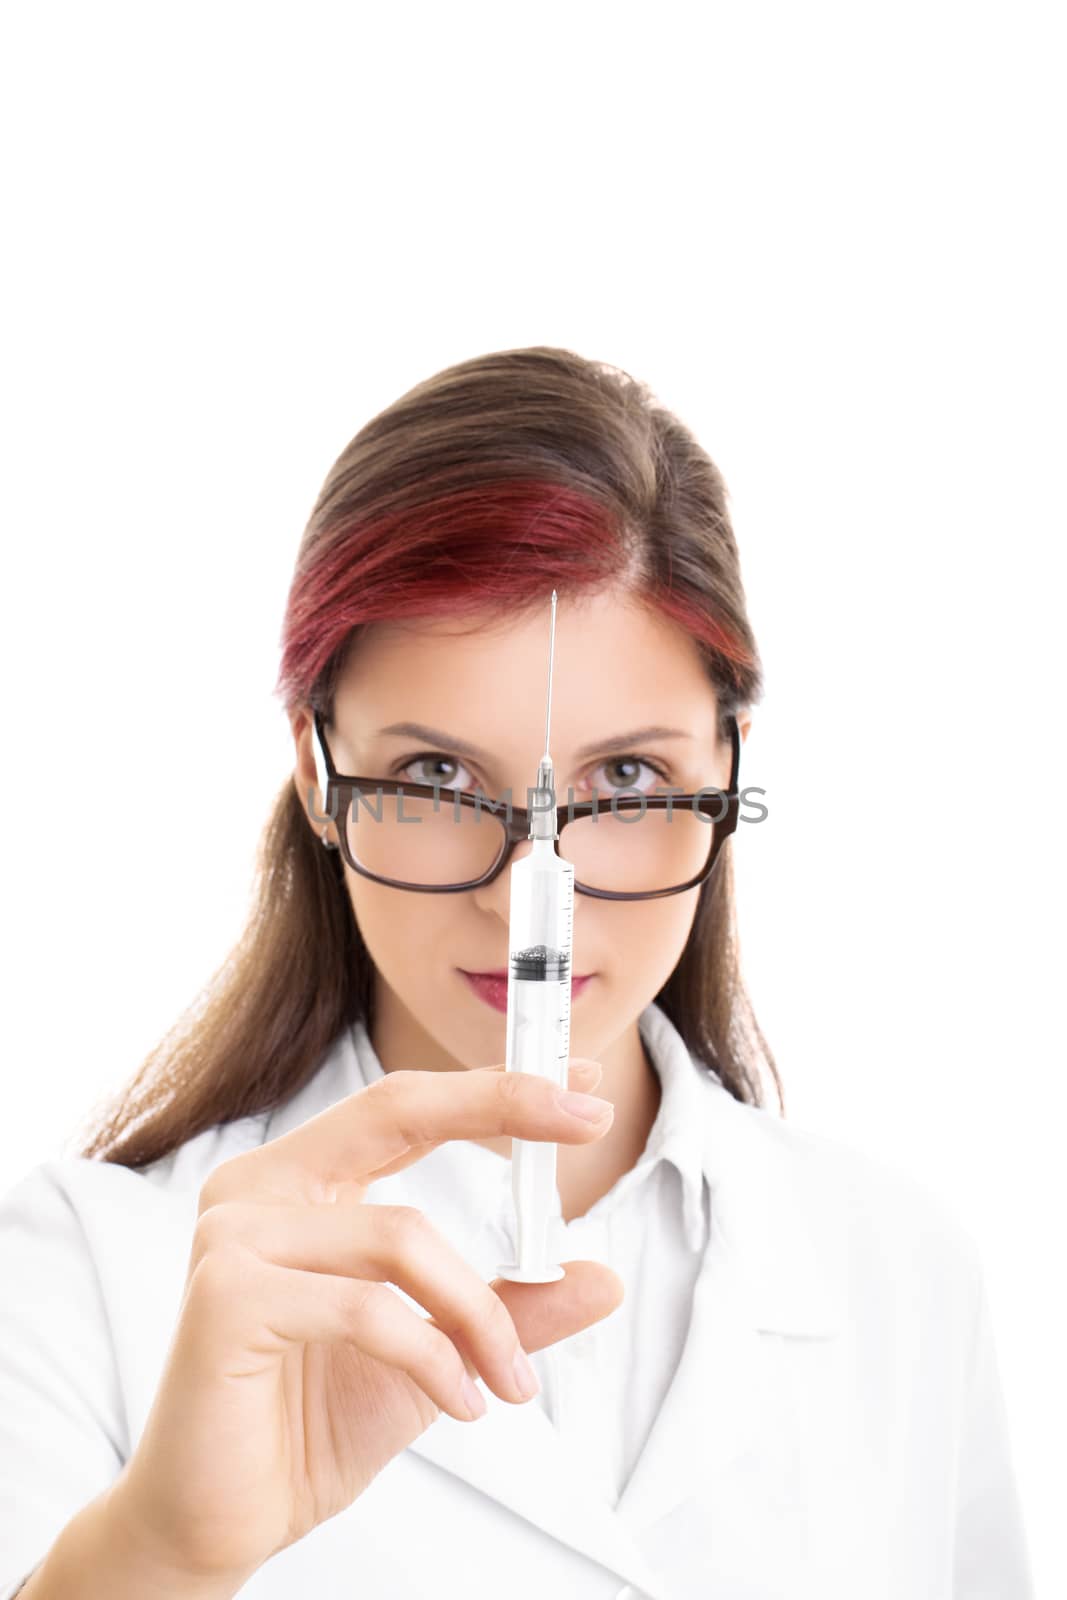 Close up shot of a young female doctor with glasses holding a syringe with needle, isolated on white background.